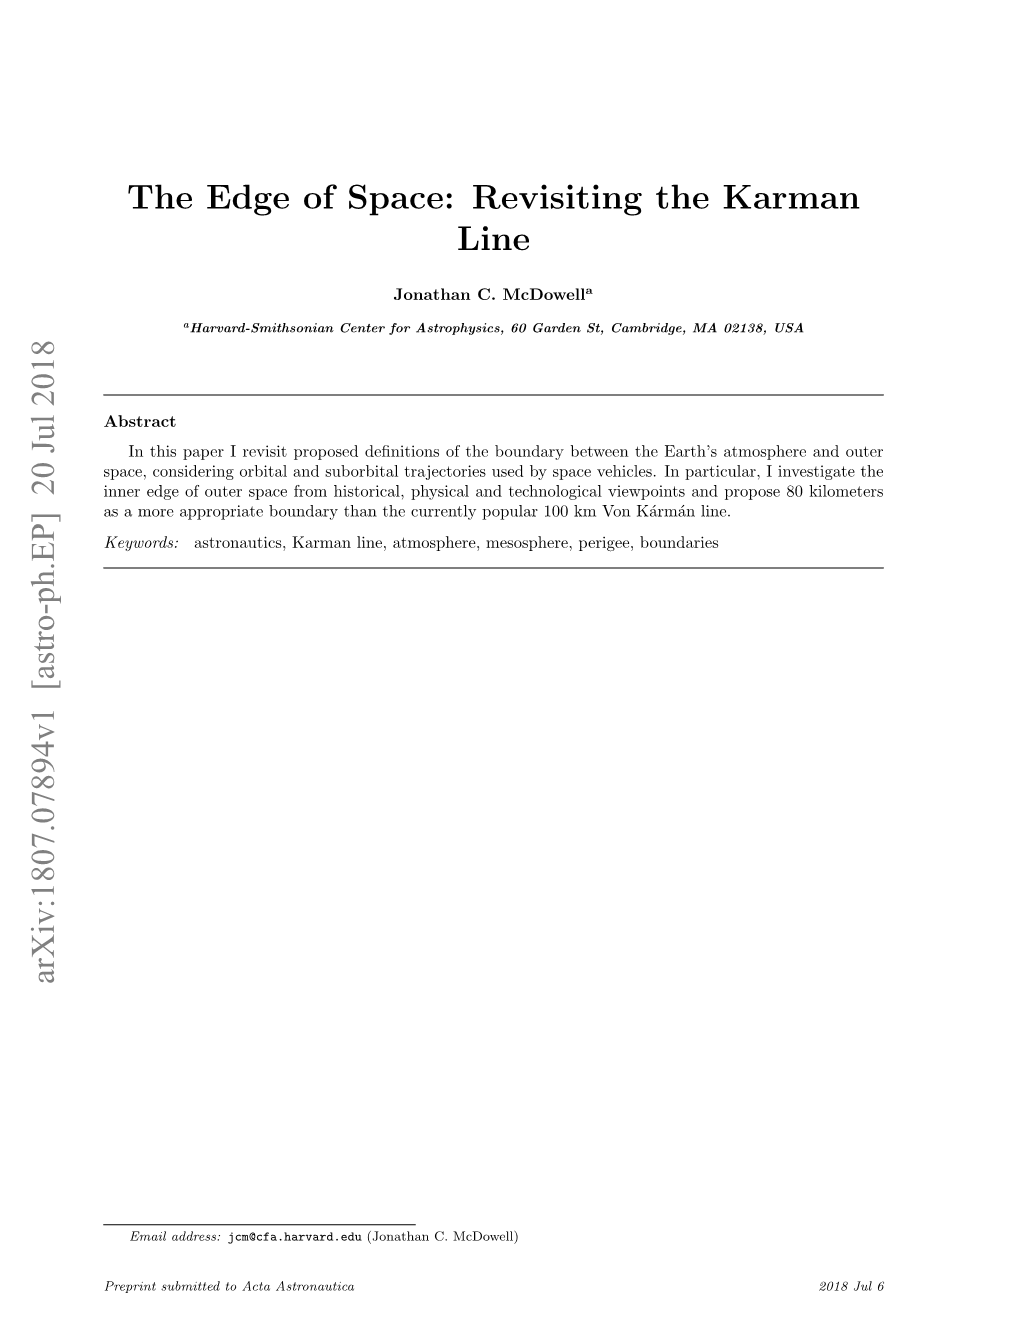 The Edge of Space: Revisiting the Karman Line Arxiv:1807.07894V1